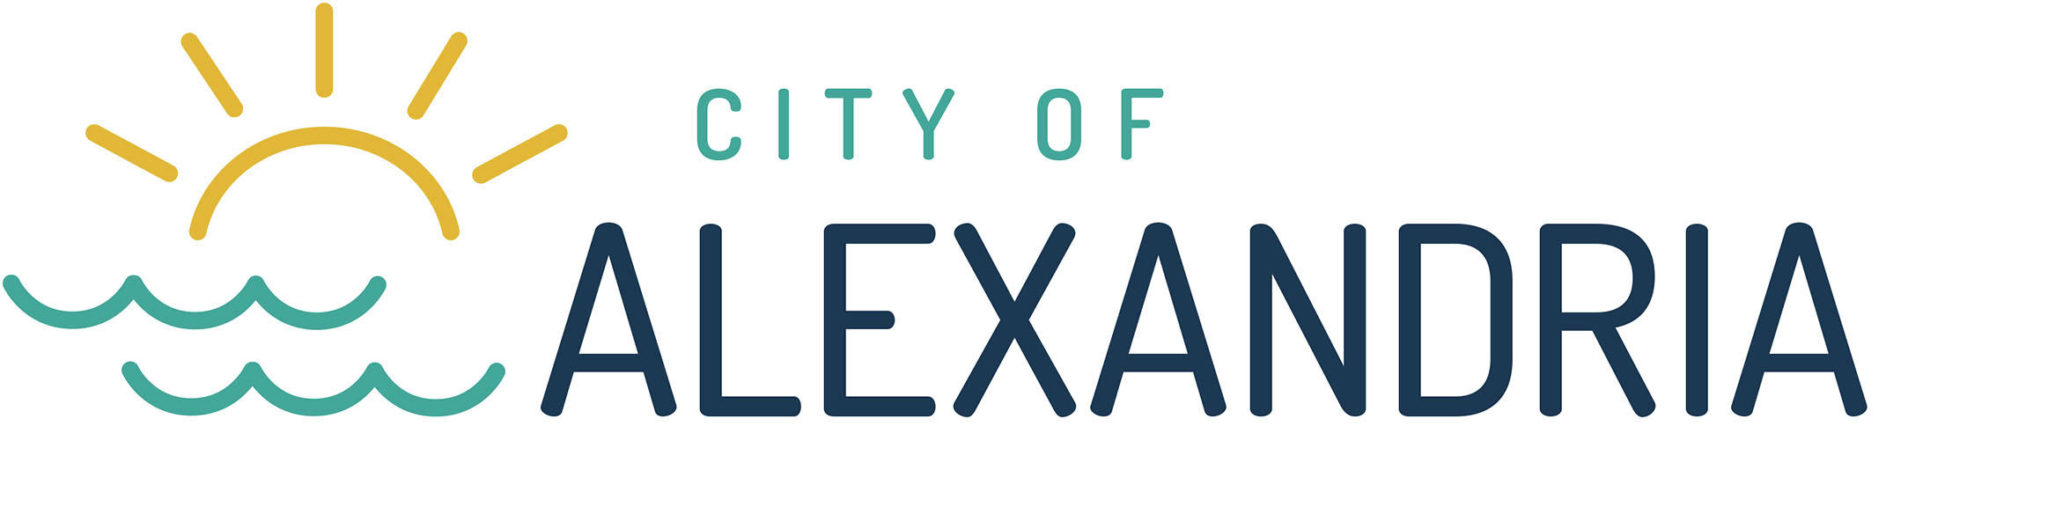 City of Alexandria official logo with City of on top